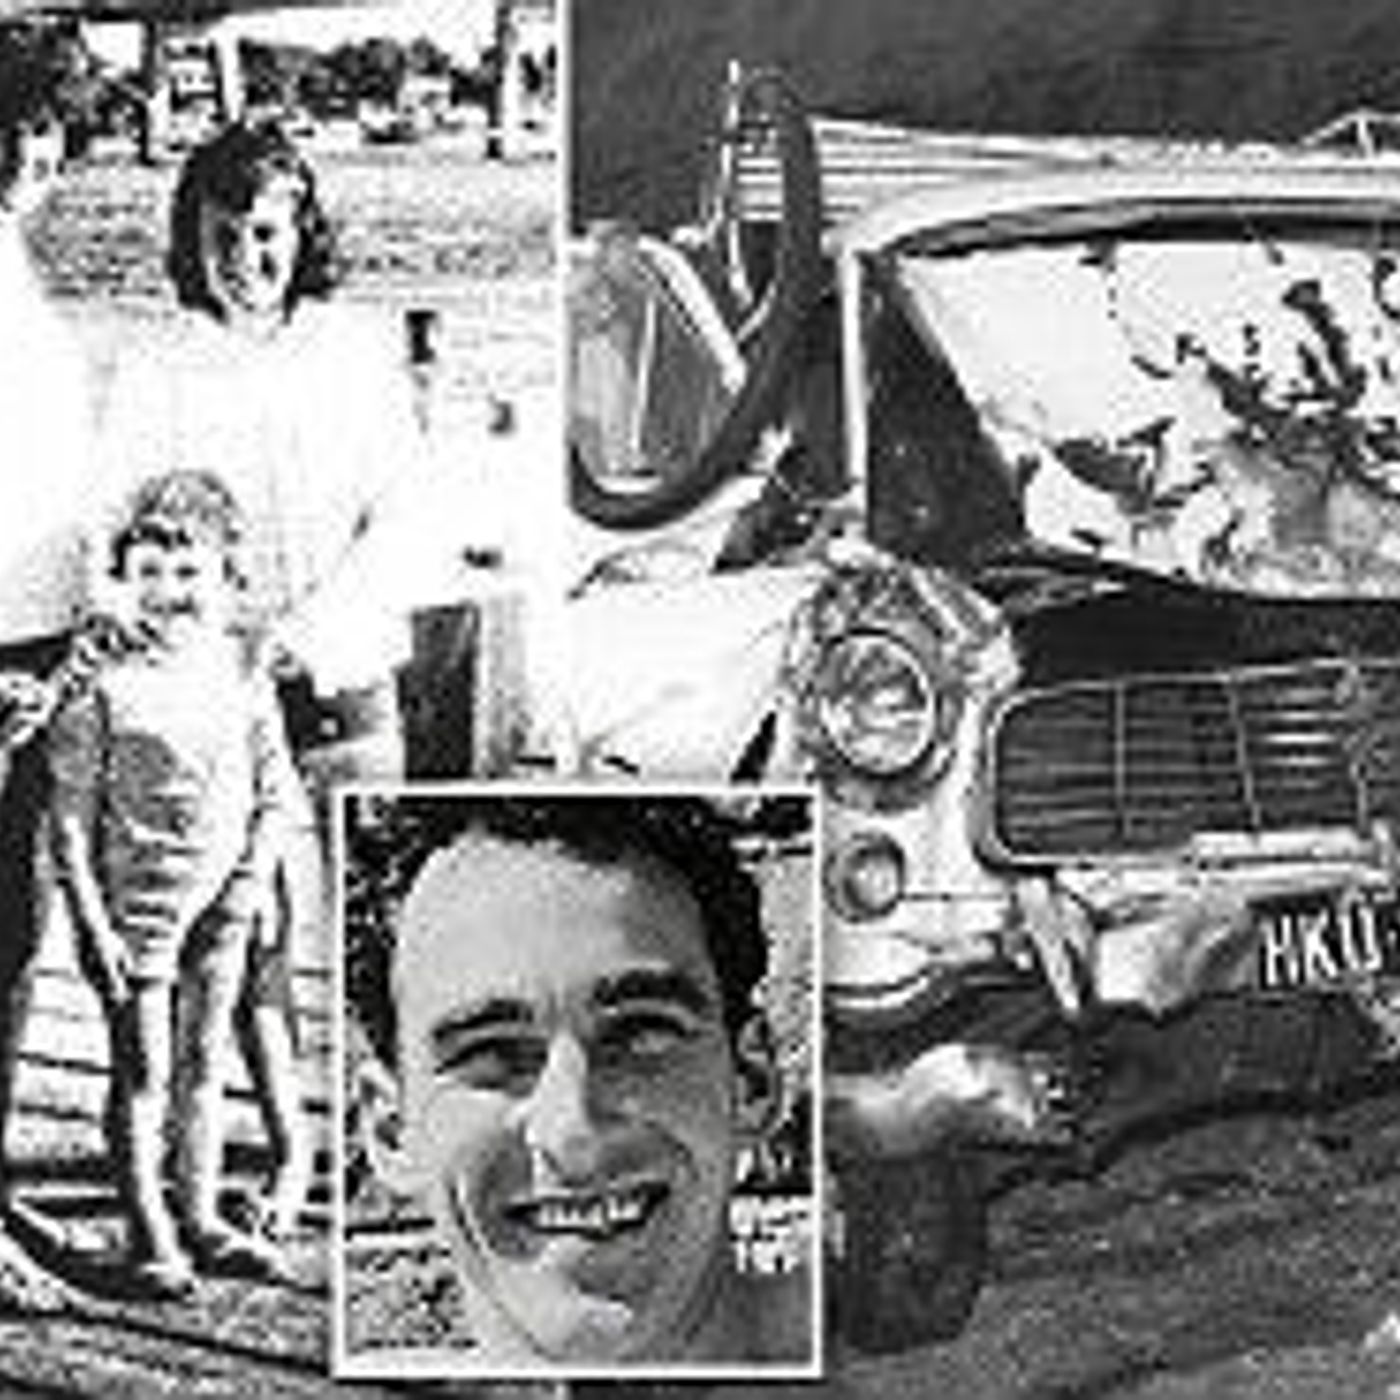 Episode 70: The Crawford Family Murders